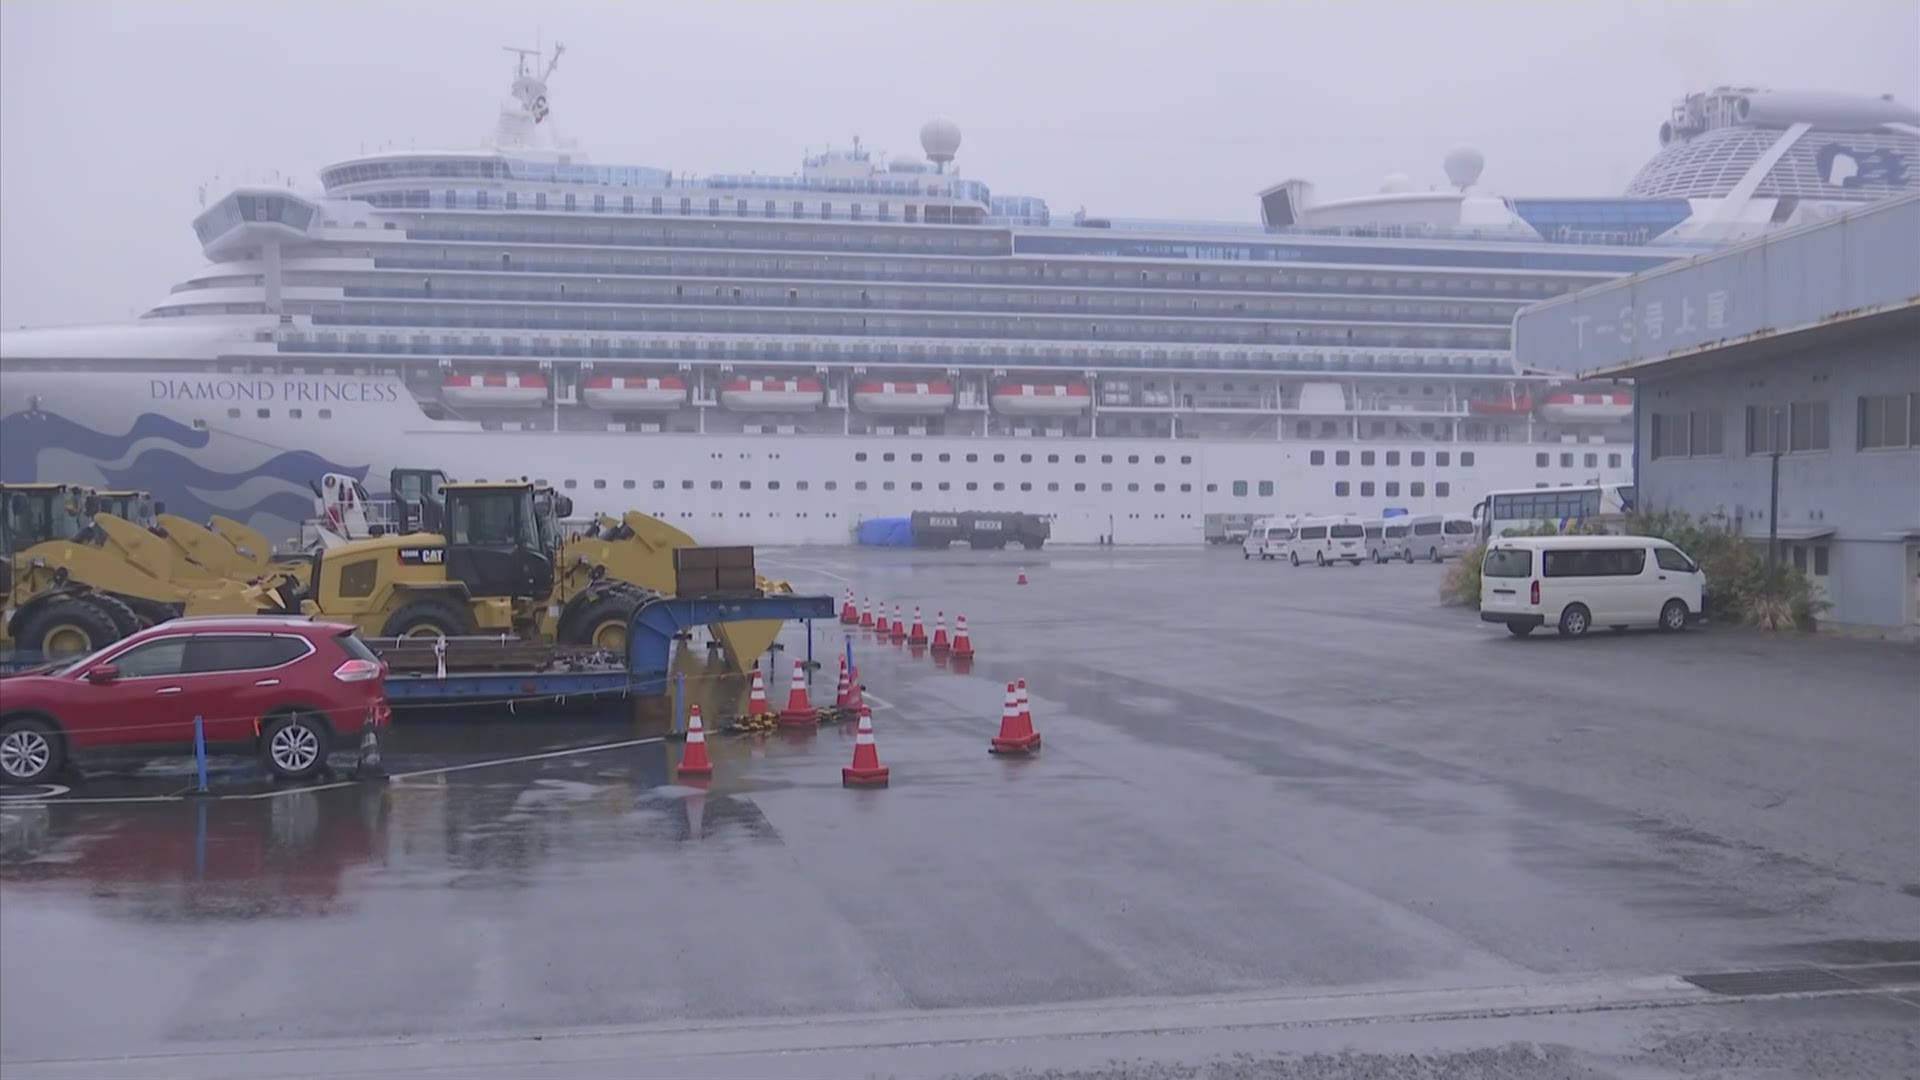 The U.S. Embassy in Japan says the 380 Americans aboard the quarantined cruise ship will be flown back home. Almost 300 people tested positive for a new virus.